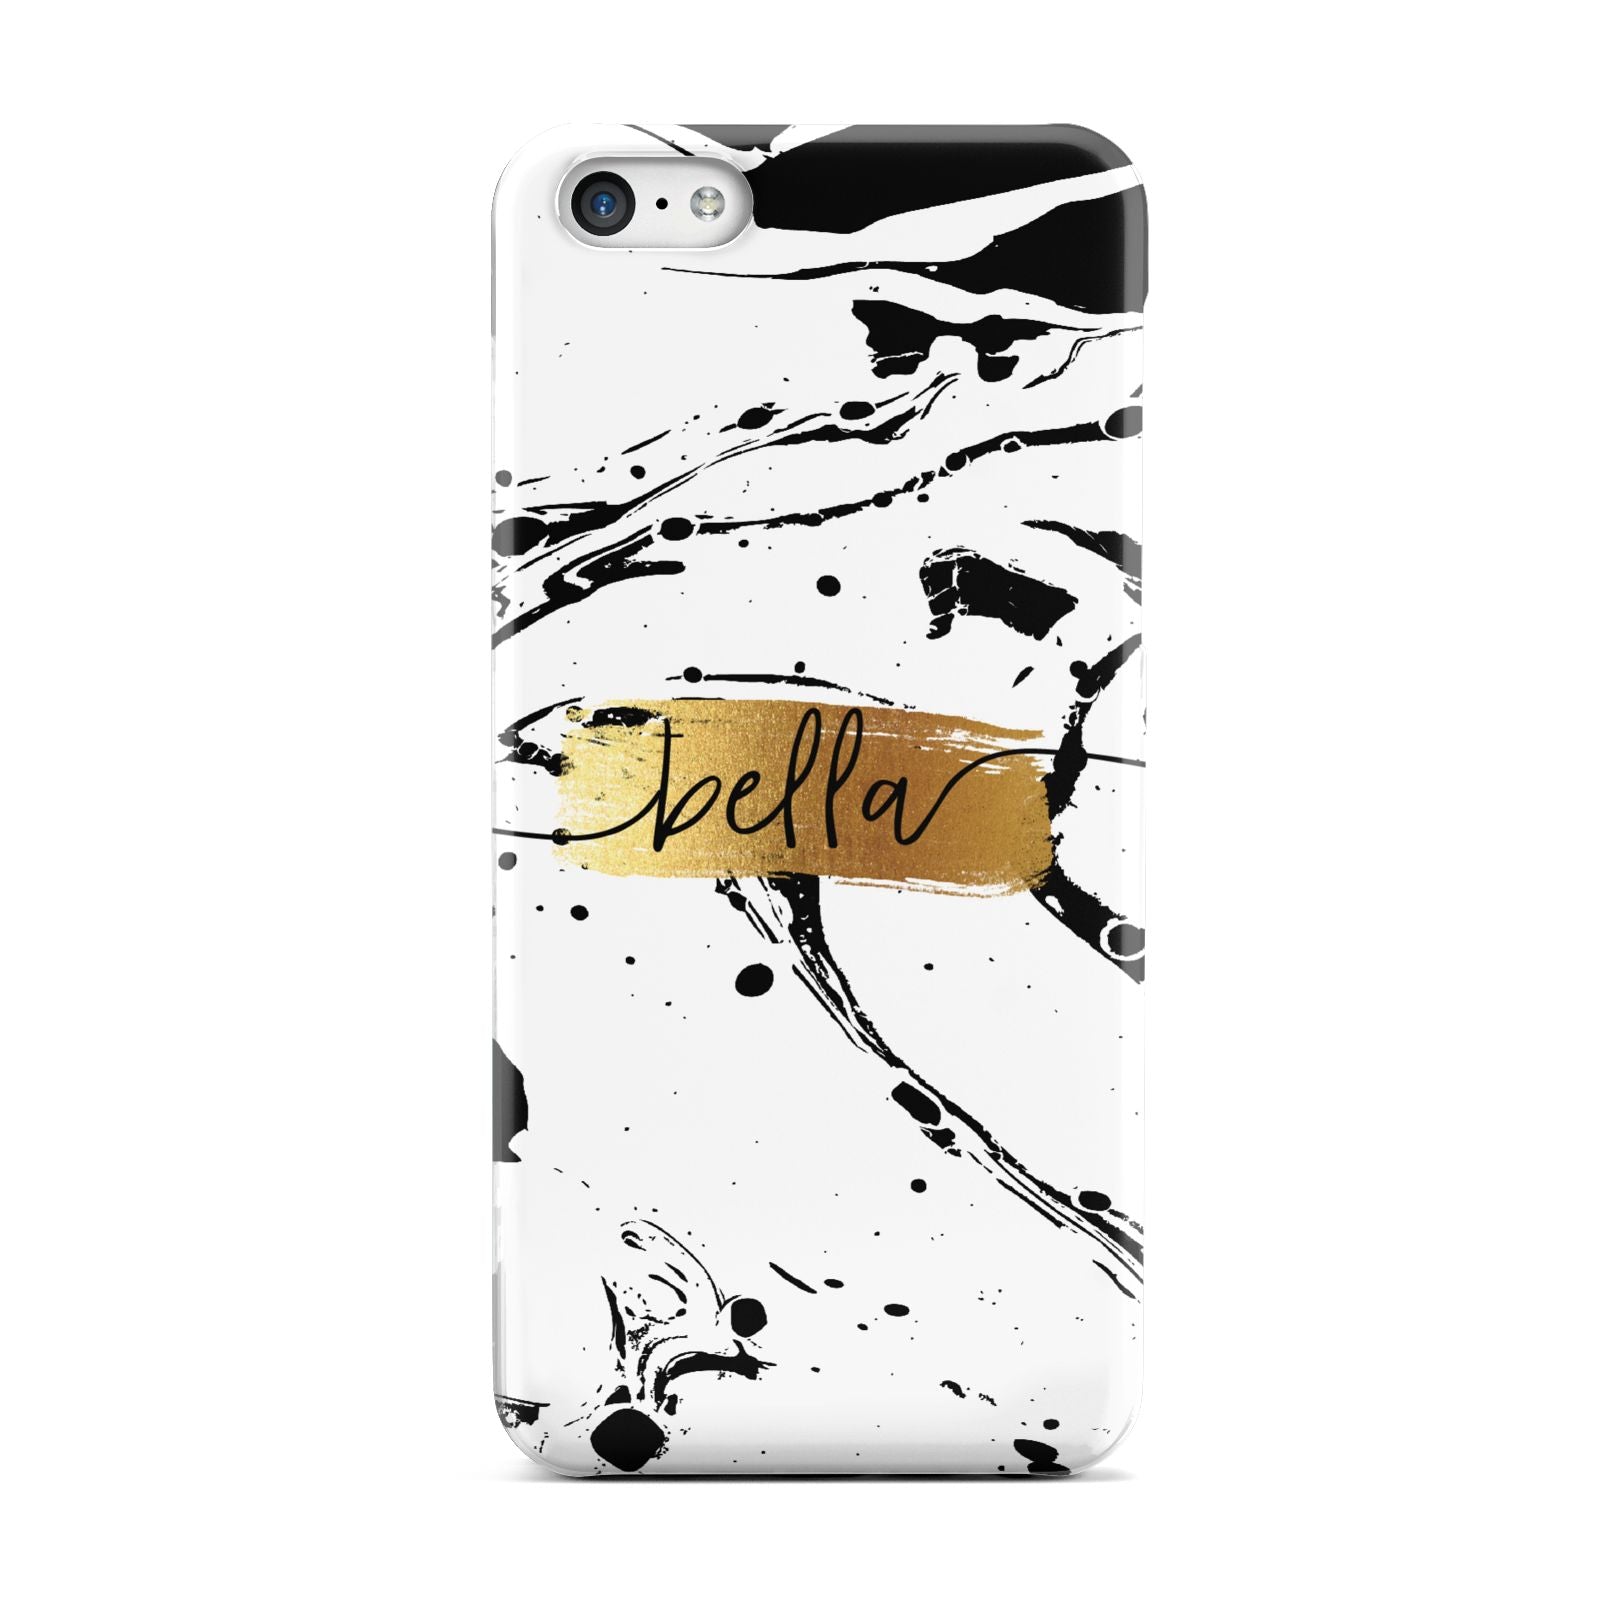 Personalised White Gold Swirl Marble Apple iPhone 5c Case